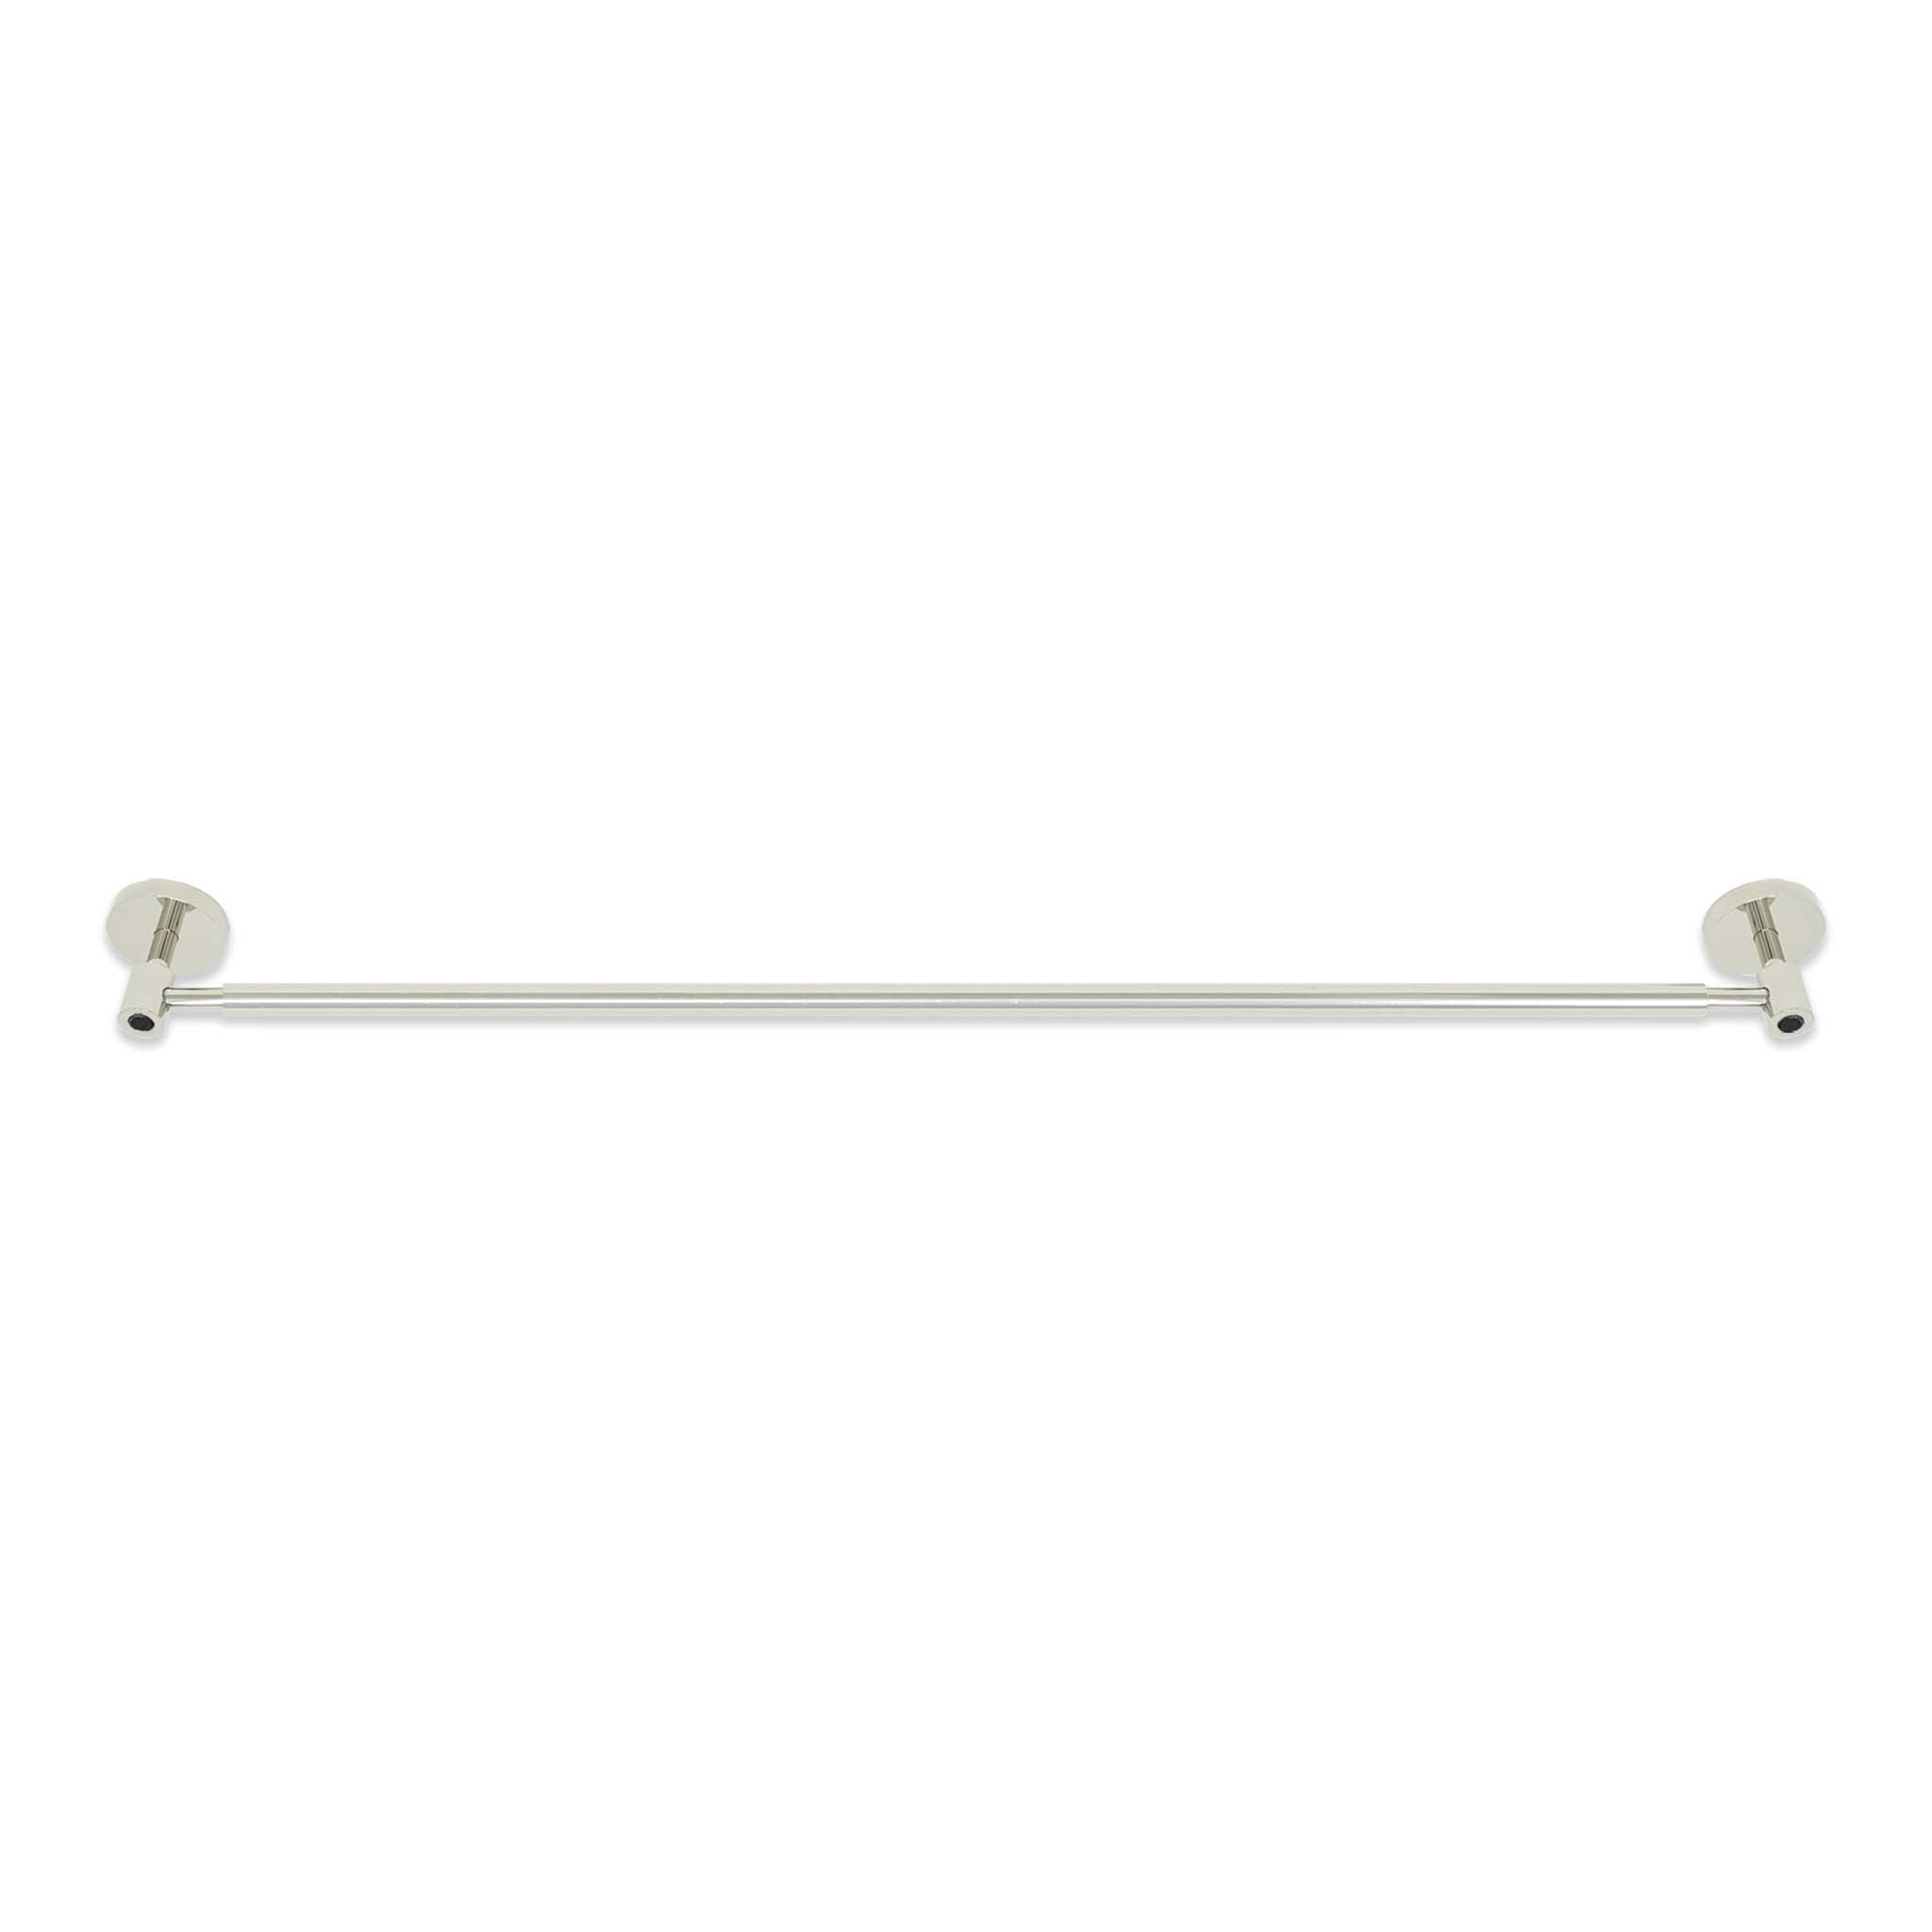 Nickel and black color Head towel bar 24" Dutton Brown hardware